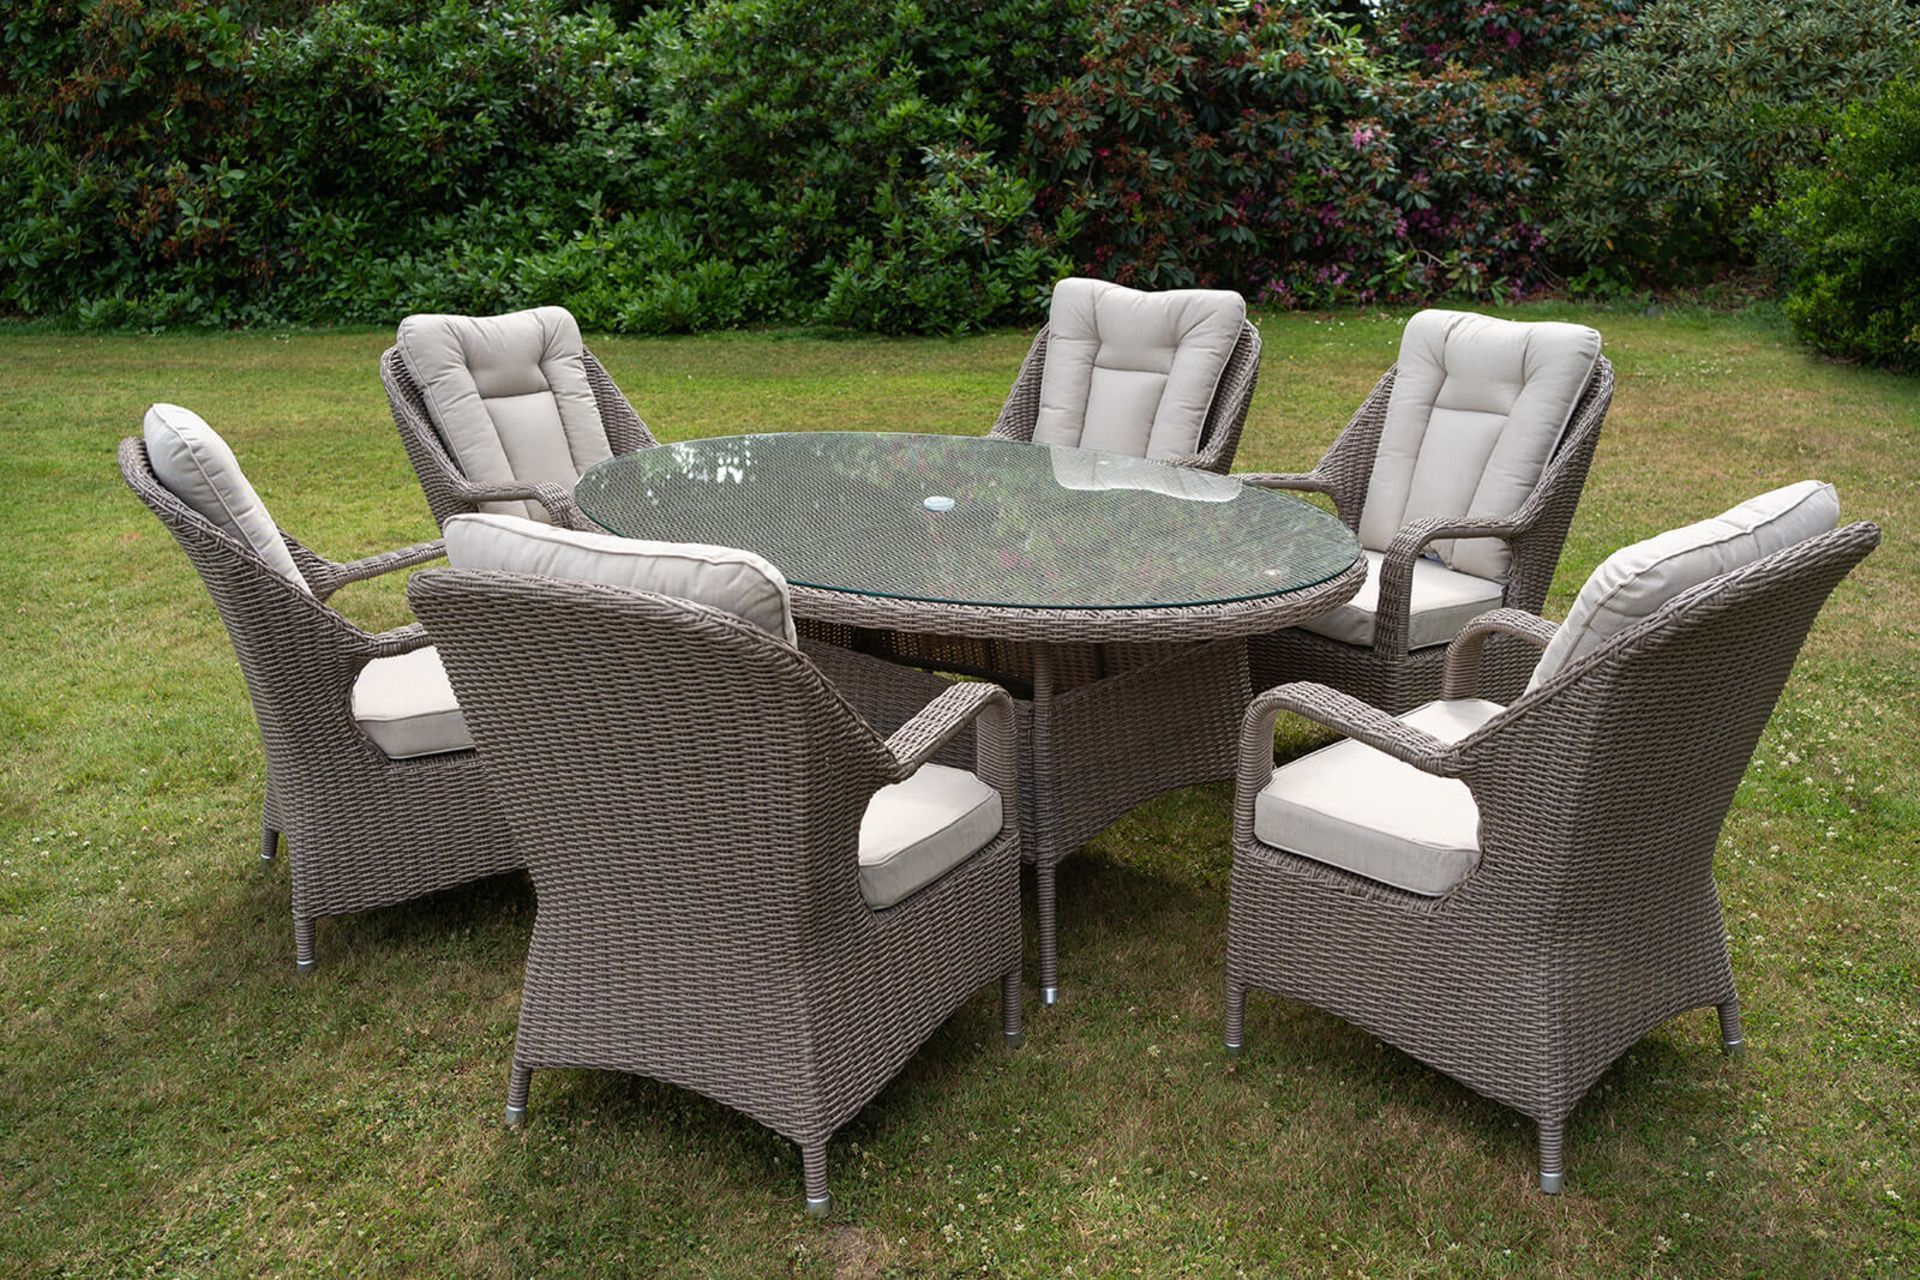 Brand New Moda Furniture 6 Seater Oval Outdoor Dining Set in Natural With Cream Cushions. RRP £